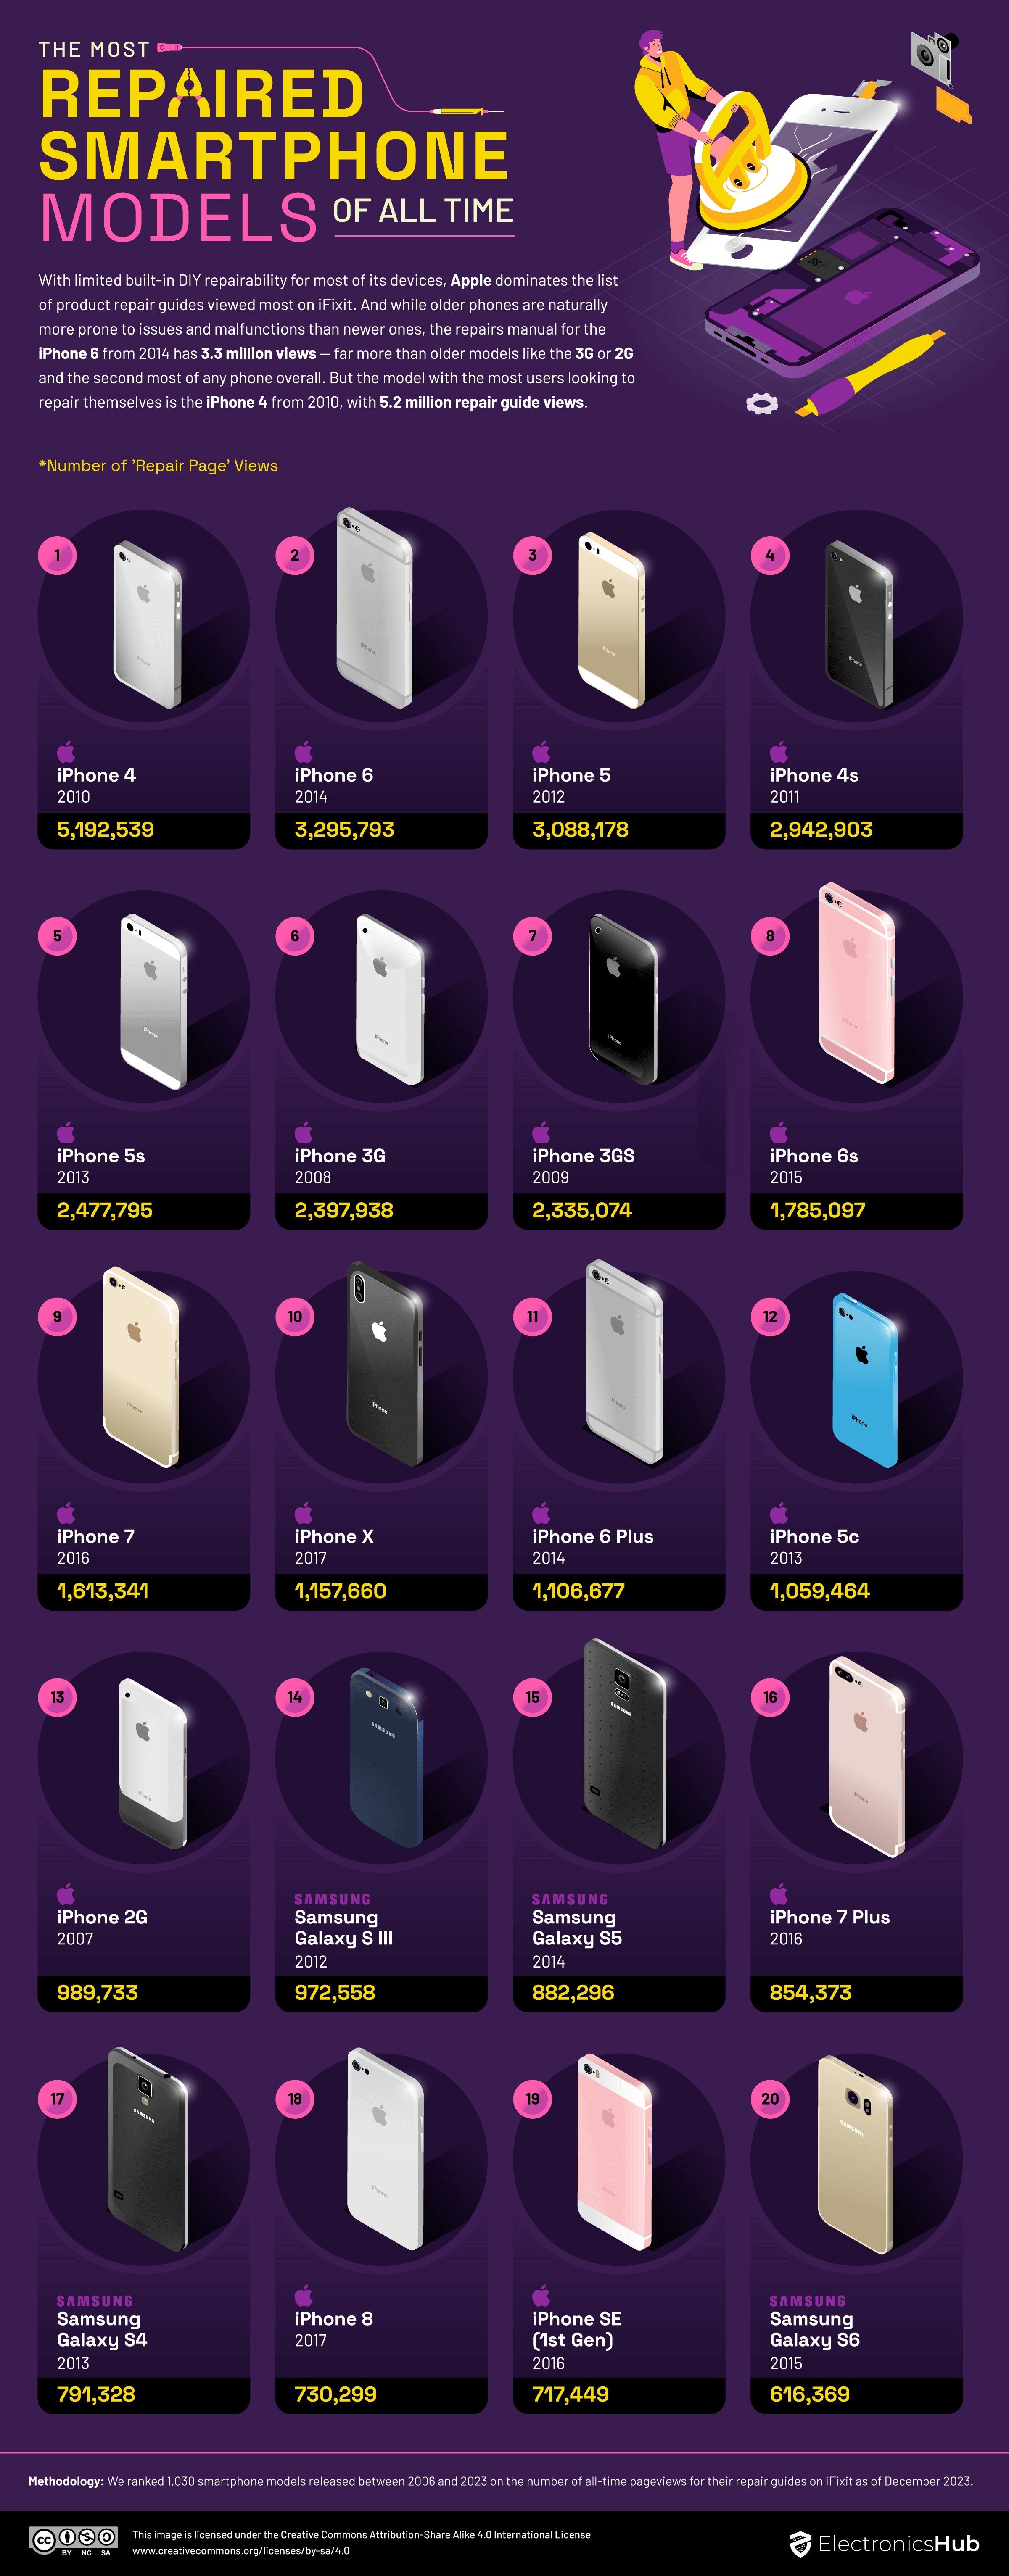 The 20 most repaired smartphones of all time - Can you guess which smartphone is the most repaired of all time?